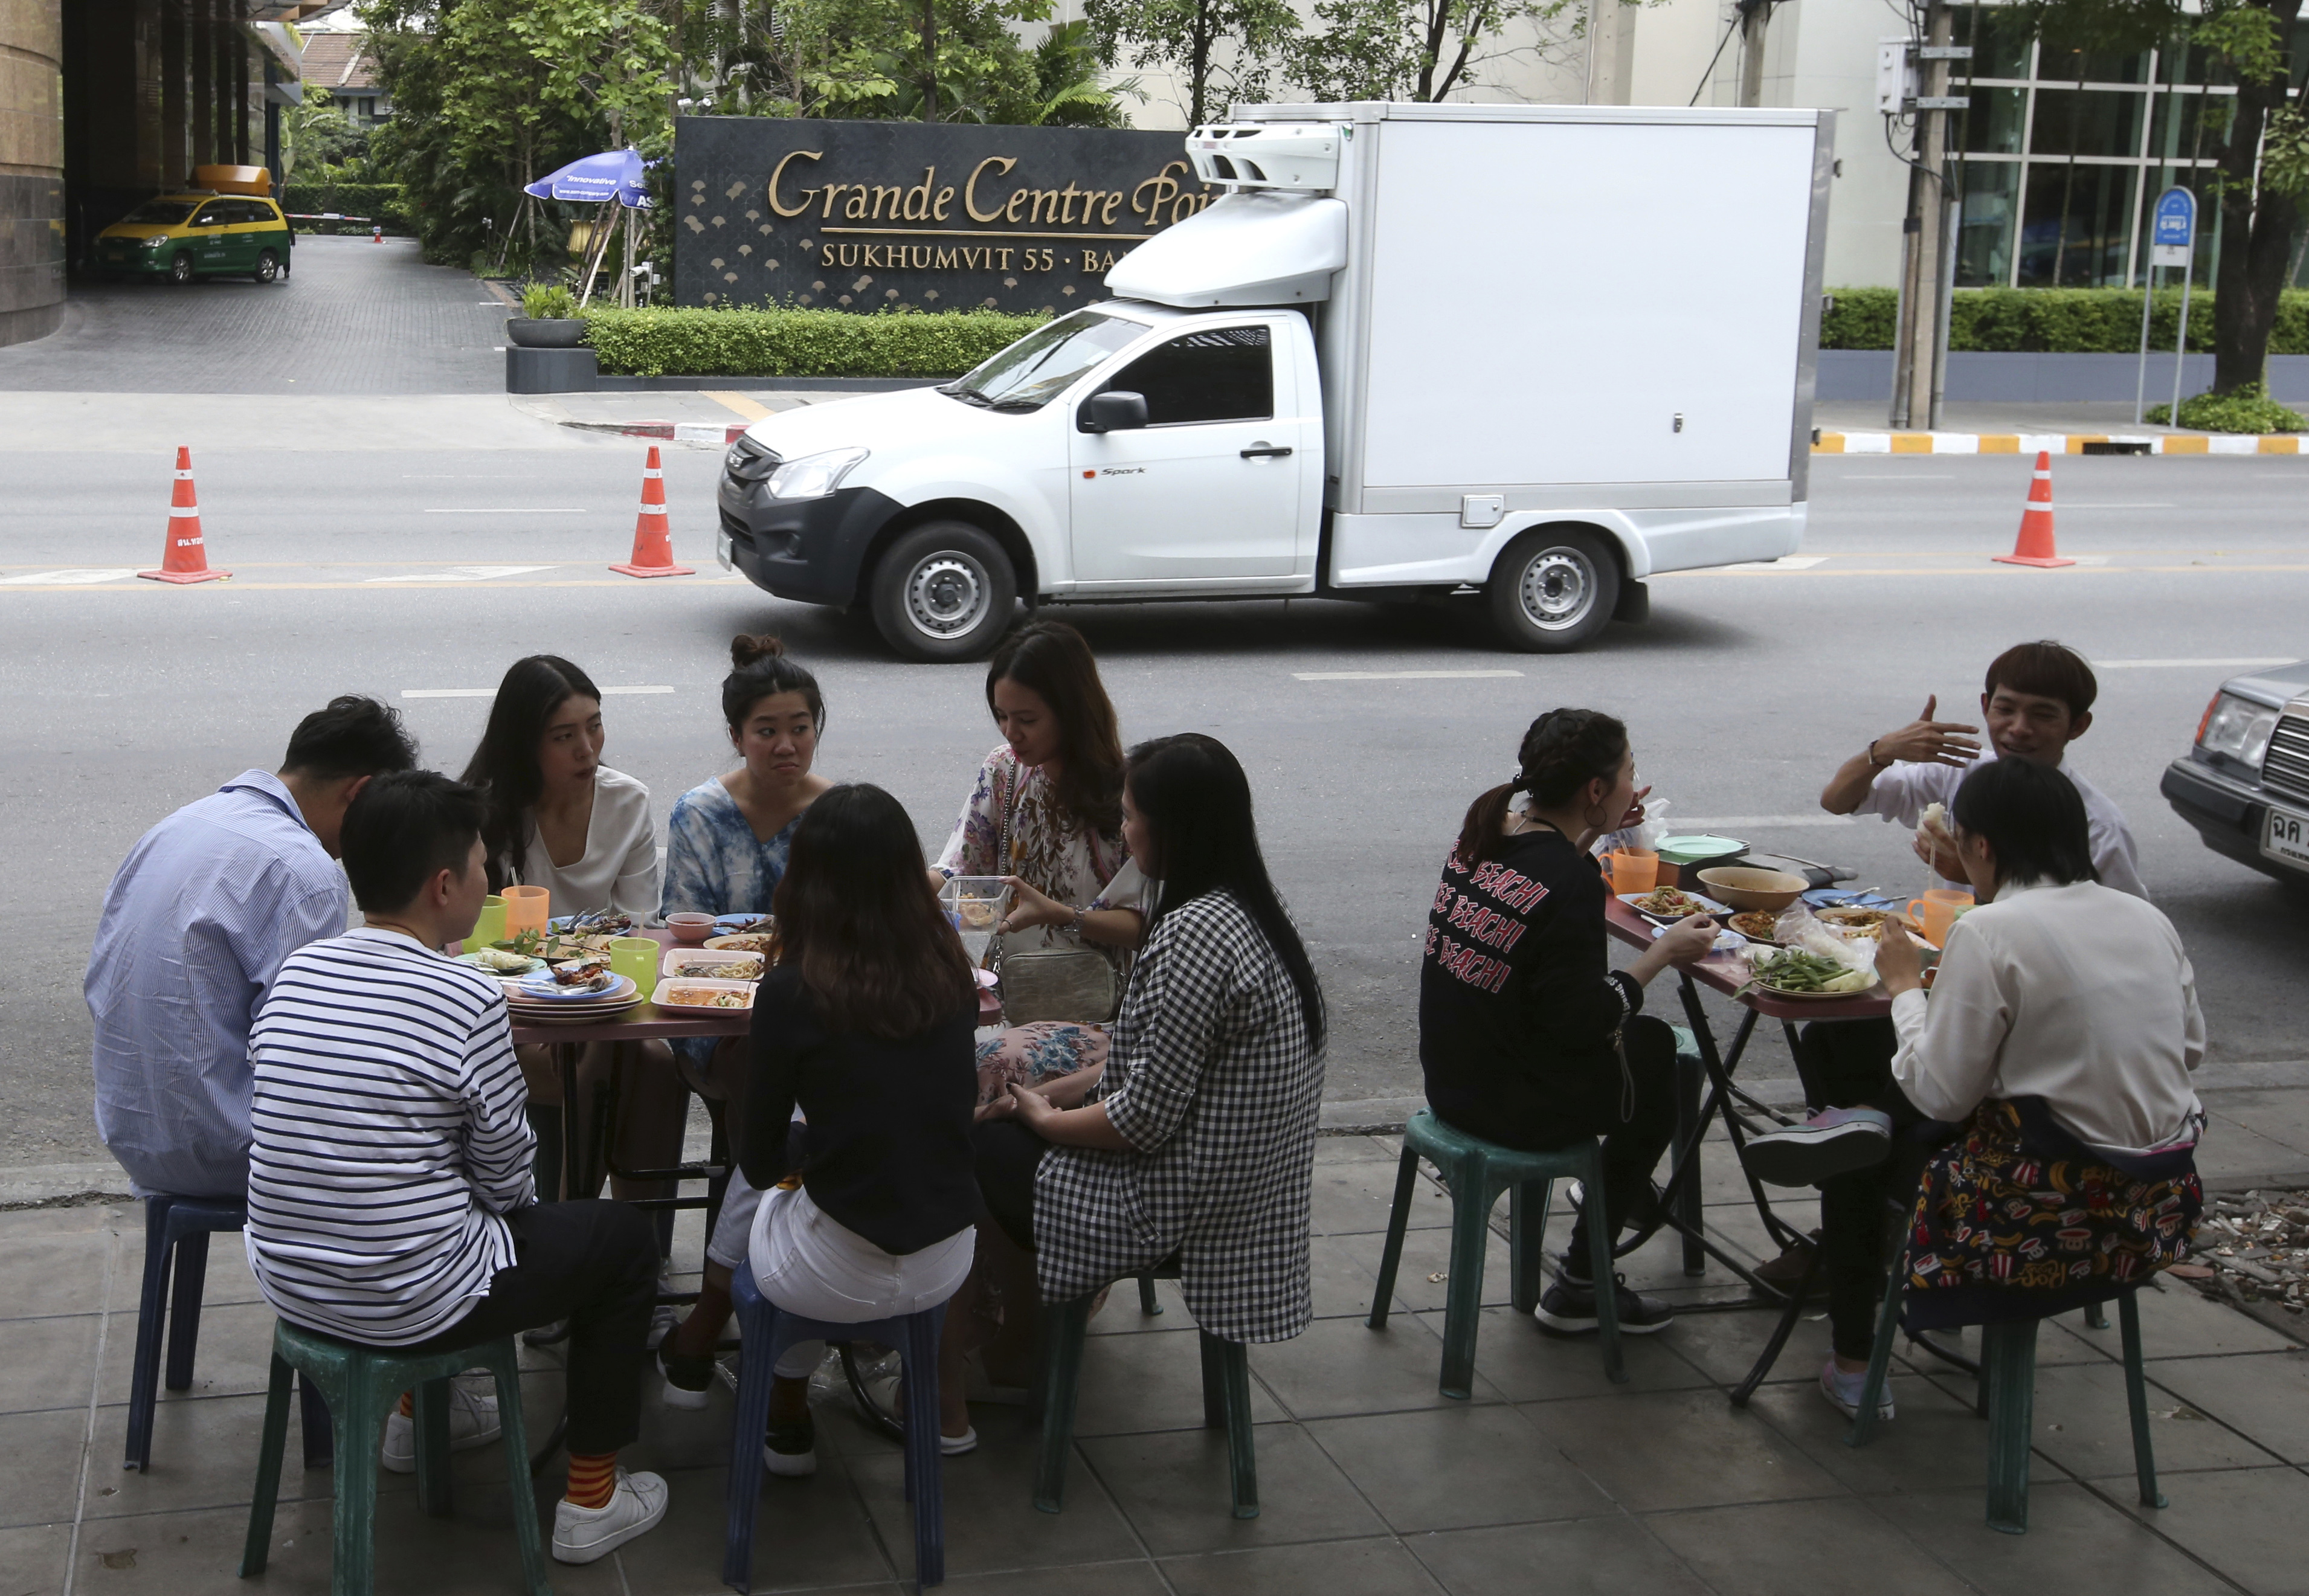 In this April 7, 2017 photo, people have their lunch at a street food shop on Thonglor road in Bangkok, Thailand. Officials see street food as an illegal nuisance and have warned hawkers in Thonglor to clear out by April 17. Efforts by authorities in military-ruled Thailand to impose order on the chaotic capital city have a fresh target: cheap and tasty pad thai. The latest crackdown by Bangkok city officials is going after the vendors whose carts selling everything from Thailand’s signature noodles to spicy tom yum goong soup have become institutions on the capital’s hot and humid sidewalks. (AP Photo/Sakchai Lalit)